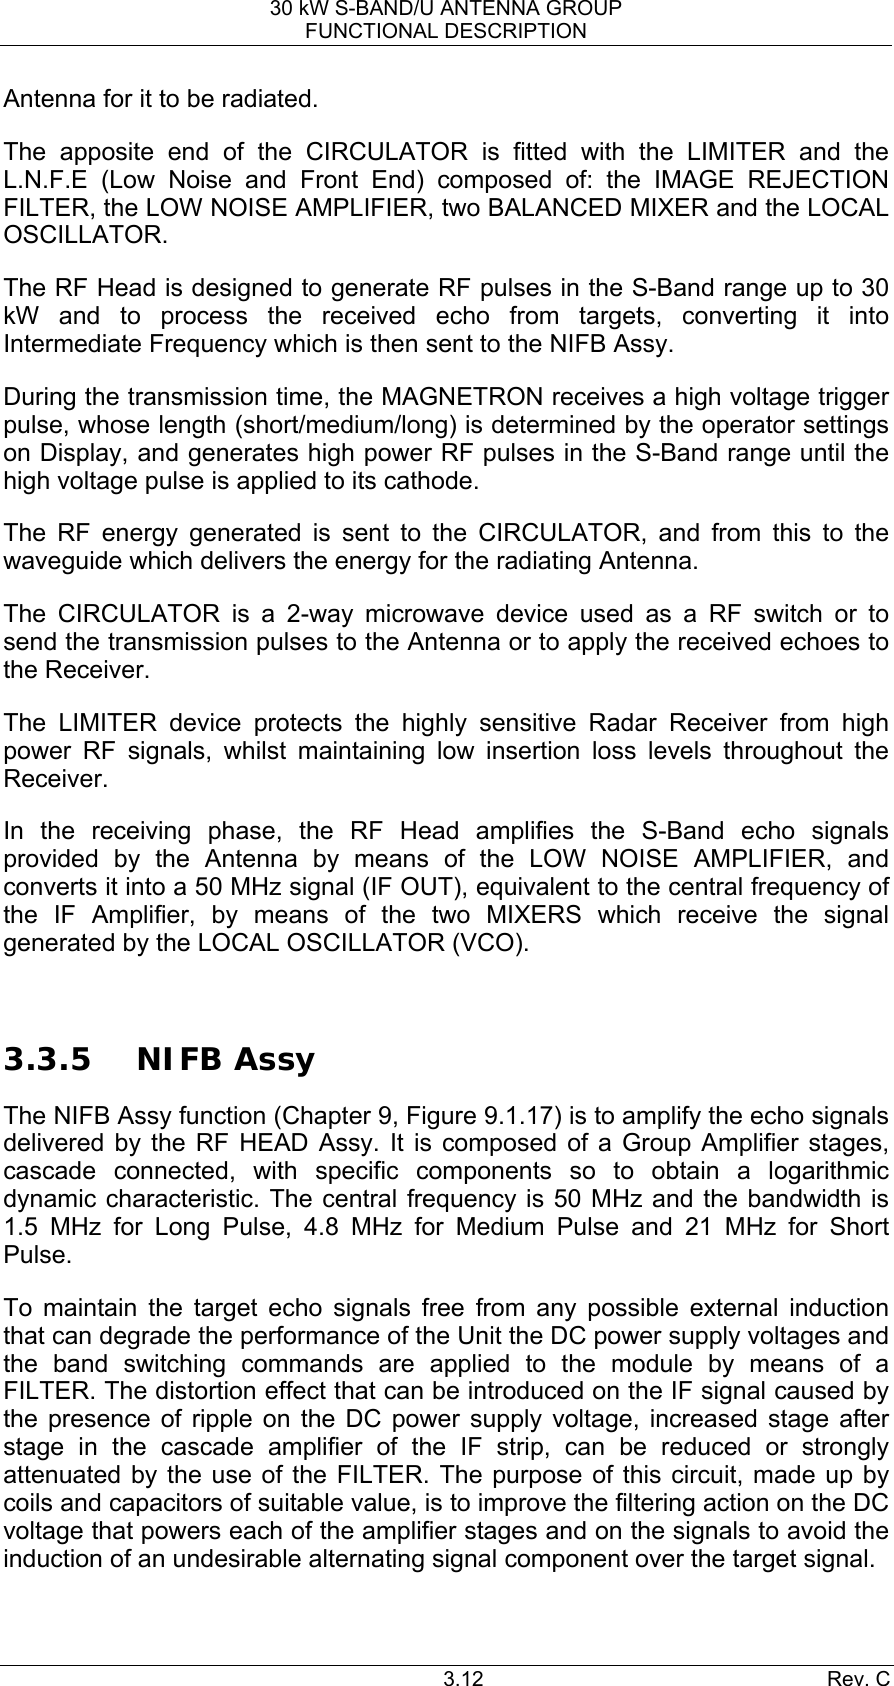 30 kW S-BAND/U ANTENNA GROUP FUNCTIONAL DESCRIPTION 3.12 Rev. C Antenna for it to be radiated. The apposite end of the CIRCULATOR is fitted with the LIMITER and the L.N.F.E (Low Noise and Front End) composed of: the IMAGE REJECTION FILTER, the LOW NOISE AMPLIFIER, two BALANCED MIXER and the LOCAL OSCILLATOR. The RF Head is designed to generate RF pulses in the S-Band range up to 30 kW and to process the received echo from targets, converting it into Intermediate Frequency which is then sent to the NIFB Assy. During the transmission time, the MAGNETRON receives a high voltage trigger pulse, whose length (short/medium/long) is determined by the operator settings on Display, and generates high power RF pulses in the S-Band range until the high voltage pulse is applied to its cathode. The RF energy generated is sent to the CIRCULATOR, and from this to the waveguide which delivers the energy for the radiating Antenna. The CIRCULATOR is a 2-way microwave device used as a RF switch or to send the transmission pulses to the Antenna or to apply the received echoes to the Receiver. The LIMITER device protects the highly sensitive Radar Receiver from high power RF signals, whilst maintaining low insertion loss levels throughout the Receiver. In the receiving phase, the RF Head amplifies the S-Band echo signals provided by the Antenna by means of the LOW NOISE AMPLIFIER, and converts it into a 50 MHz signal (IF OUT), equivalent to the central frequency of the IF Amplifier, by means of the two MIXERS which receive the signal generated by the LOCAL OSCILLATOR (VCO).  3.3.5 NIFB Assy The NIFB Assy function (Chapter 9, Figure 9.1.17) is to amplify the echo signals delivered by the RF HEAD Assy. It is composed of a Group Amplifier stages, cascade connected, with specific components so to obtain a logarithmic dynamic characteristic. The central frequency is 50 MHz and the bandwidth is 1.5 MHz for Long Pulse, 4.8 MHz for Medium Pulse and 21 MHz for Short Pulse. To maintain the target echo signals free from any possible external induction that can degrade the performance of the Unit the DC power supply voltages and the band switching commands are applied to the module by means of a FILTER. The distortion effect that can be introduced on the IF signal caused by the presence of ripple on the DC power supply voltage, increased stage after stage in the cascade amplifier of the IF strip, can be reduced or strongly attenuated by the use of the FILTER. The purpose of this circuit, made up by coils and capacitors of suitable value, is to improve the filtering action on the DC voltage that powers each of the amplifier stages and on the signals to avoid the induction of an undesirable alternating signal component over the target signal. 